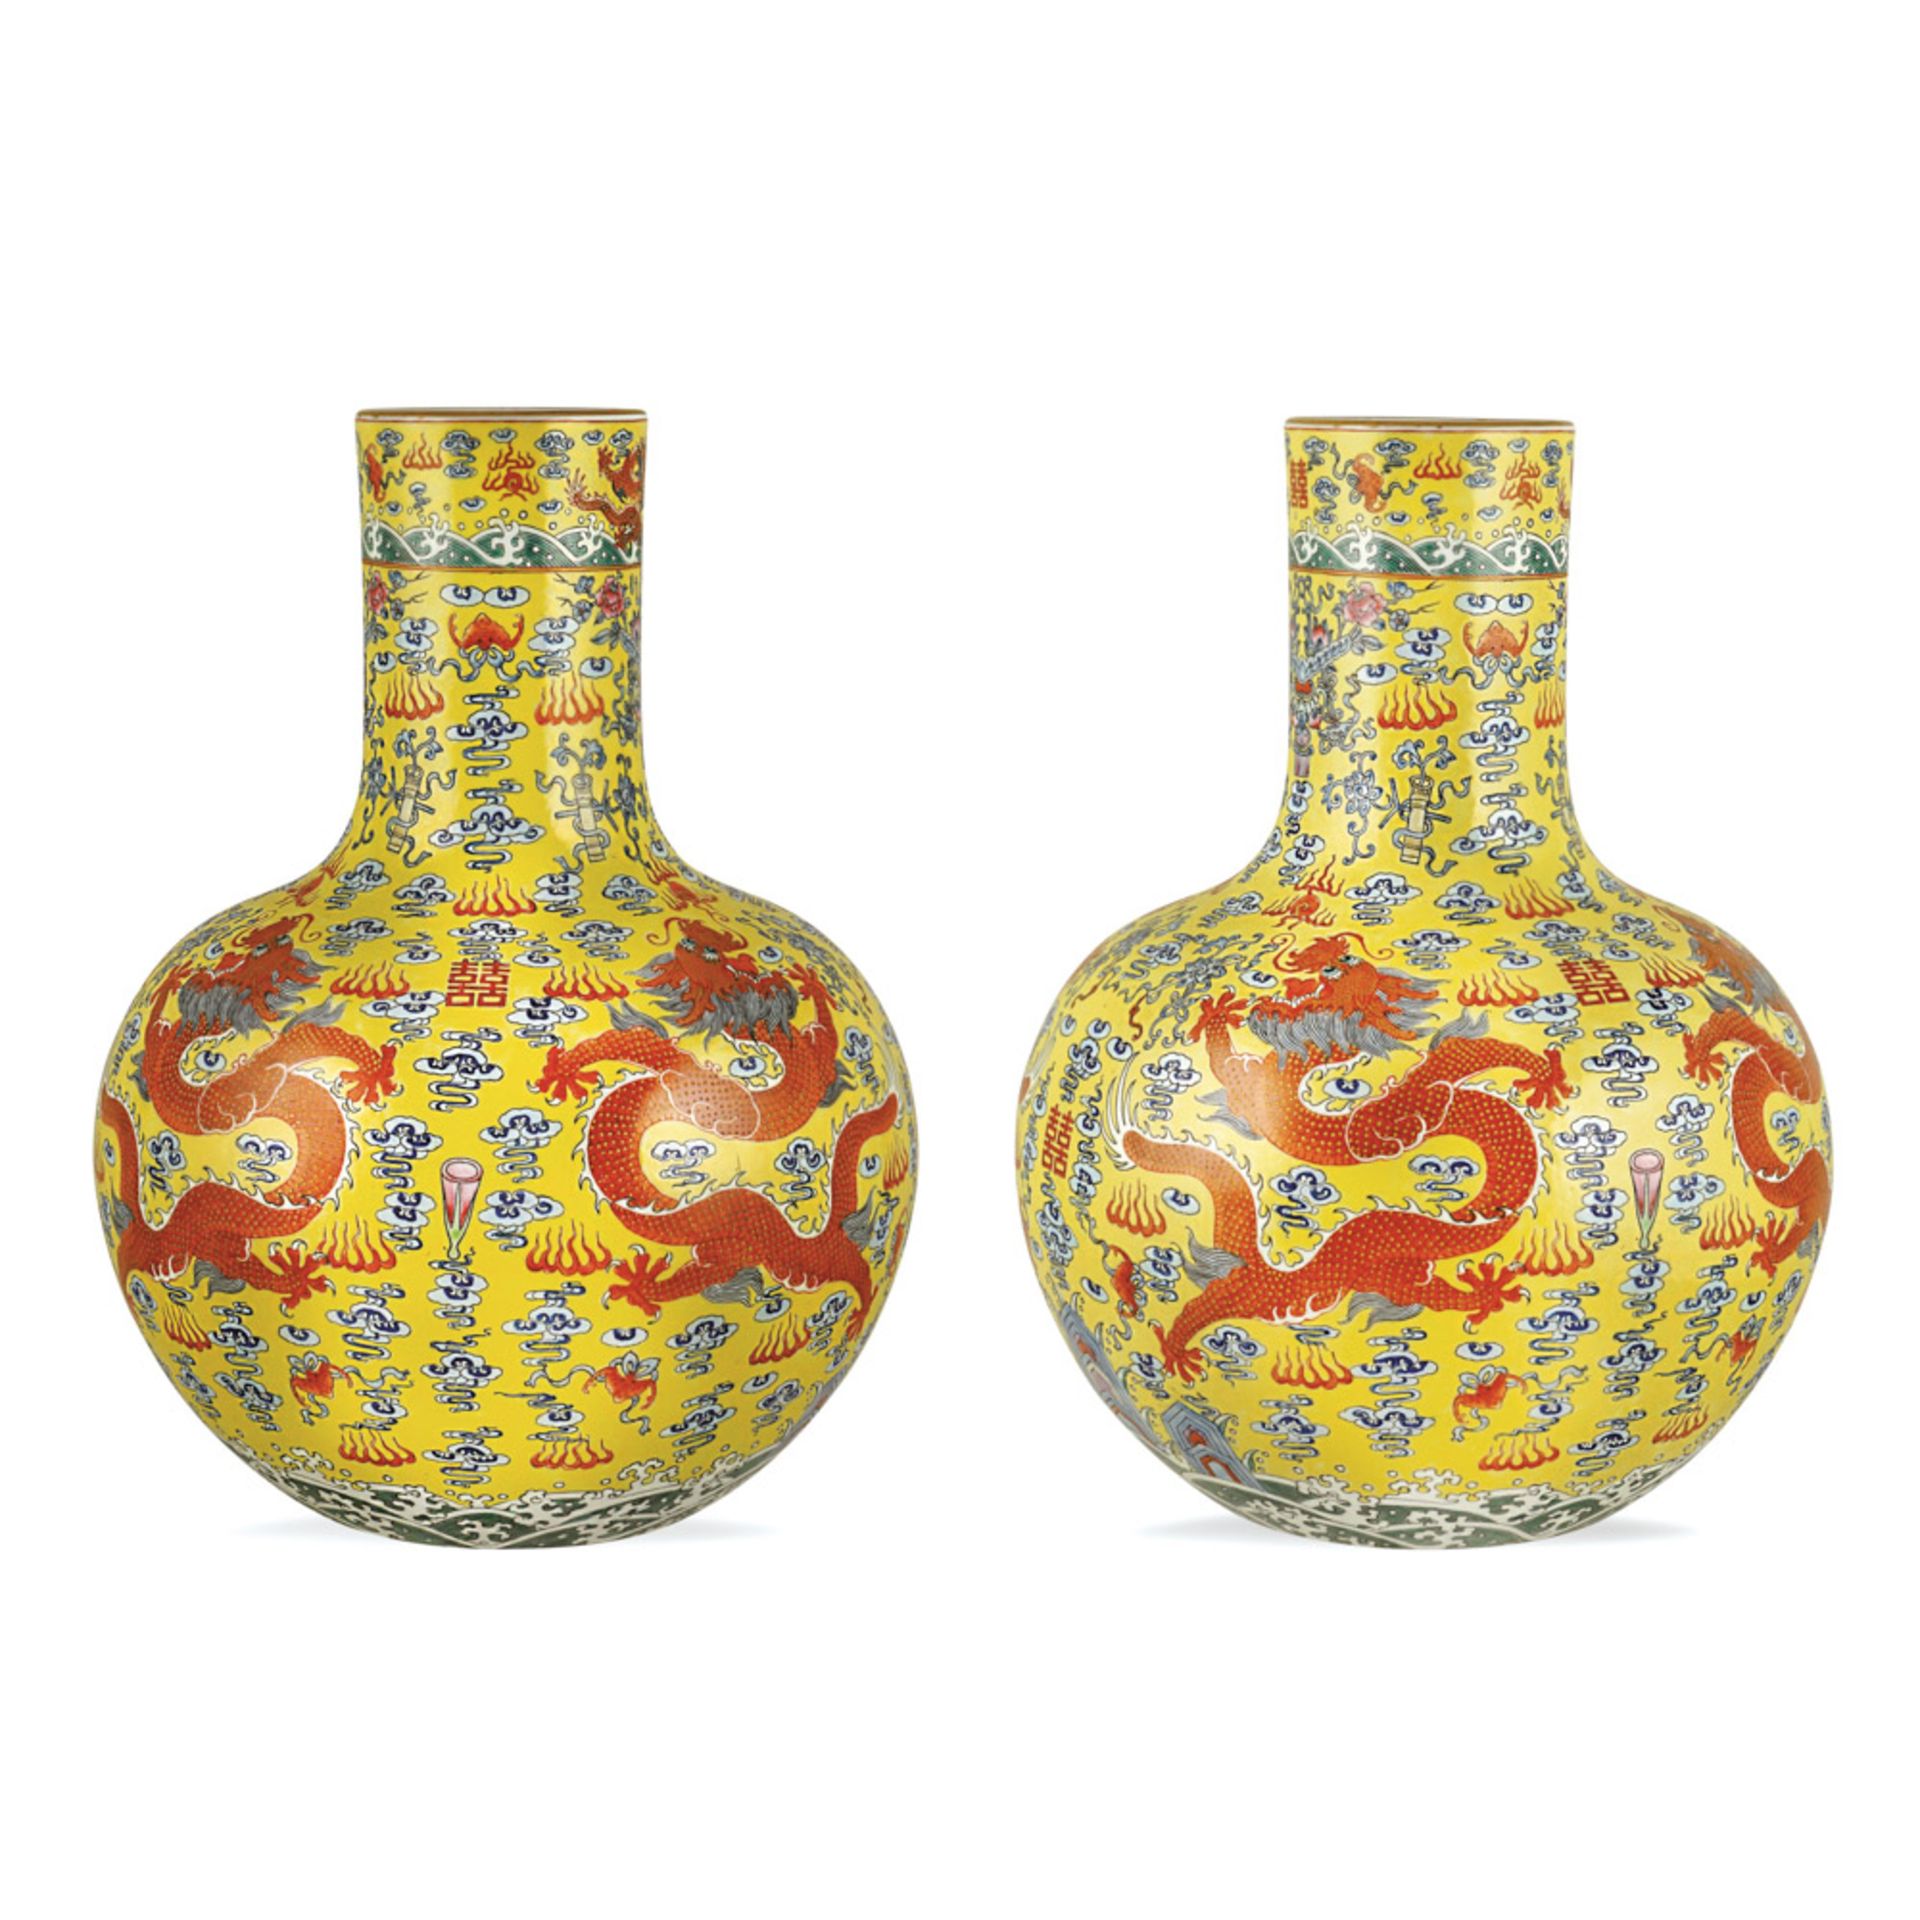 Pair of rose family porcelain vases, China Qing dinasty Tongzhi mark and period (1862 - 1874) h. 42